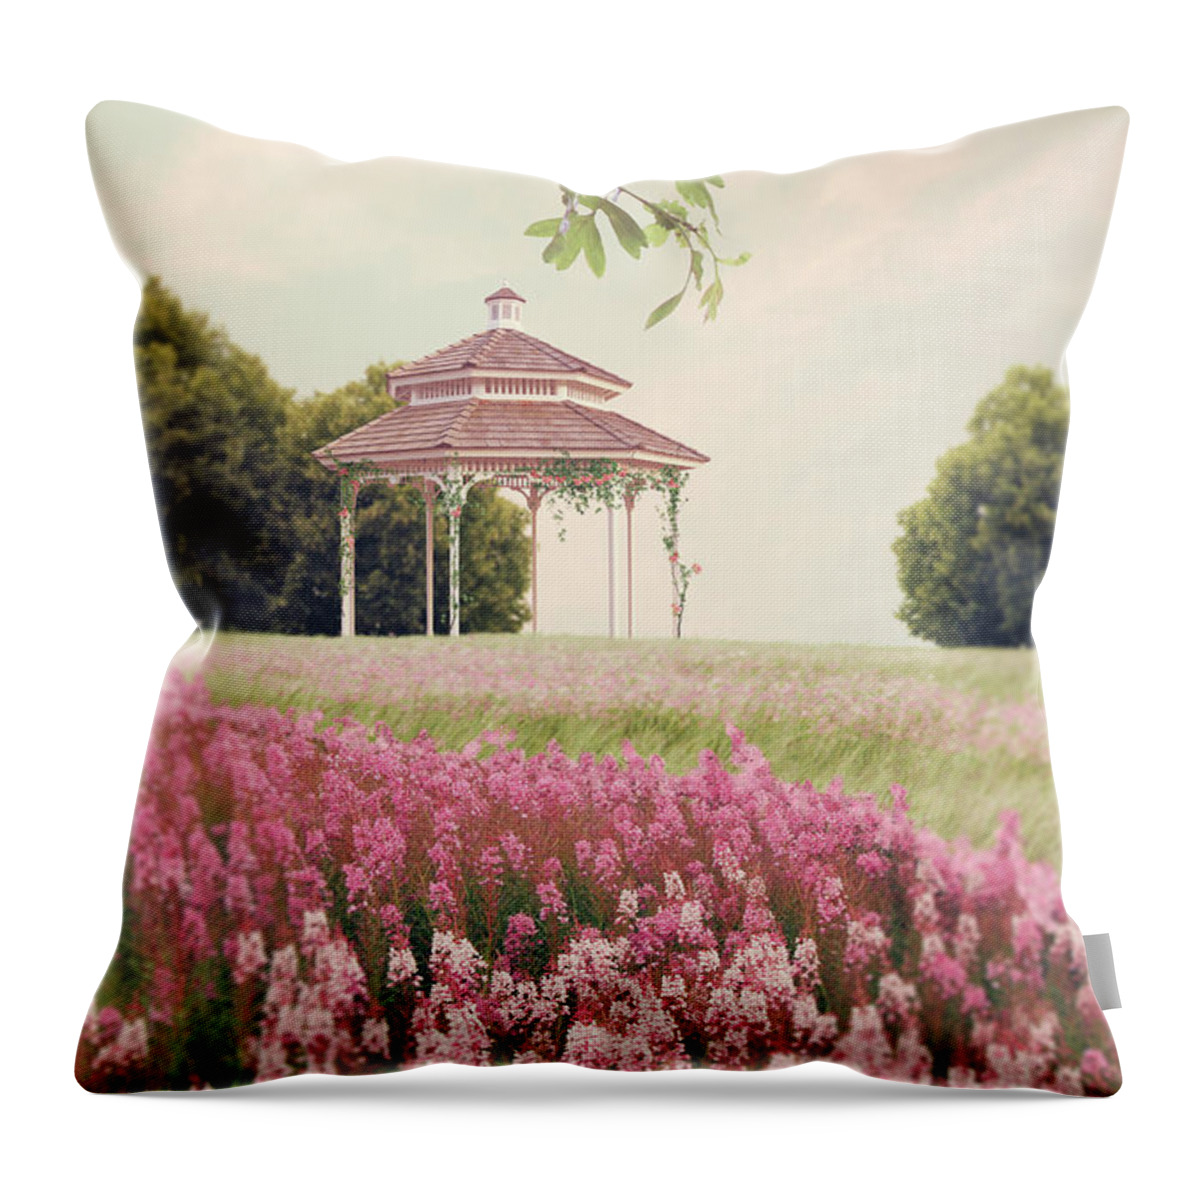 Beautiful Throw Pillow featuring the photograph Old Pergola In Beautiful Floral Grounds by Ethiriel Photography